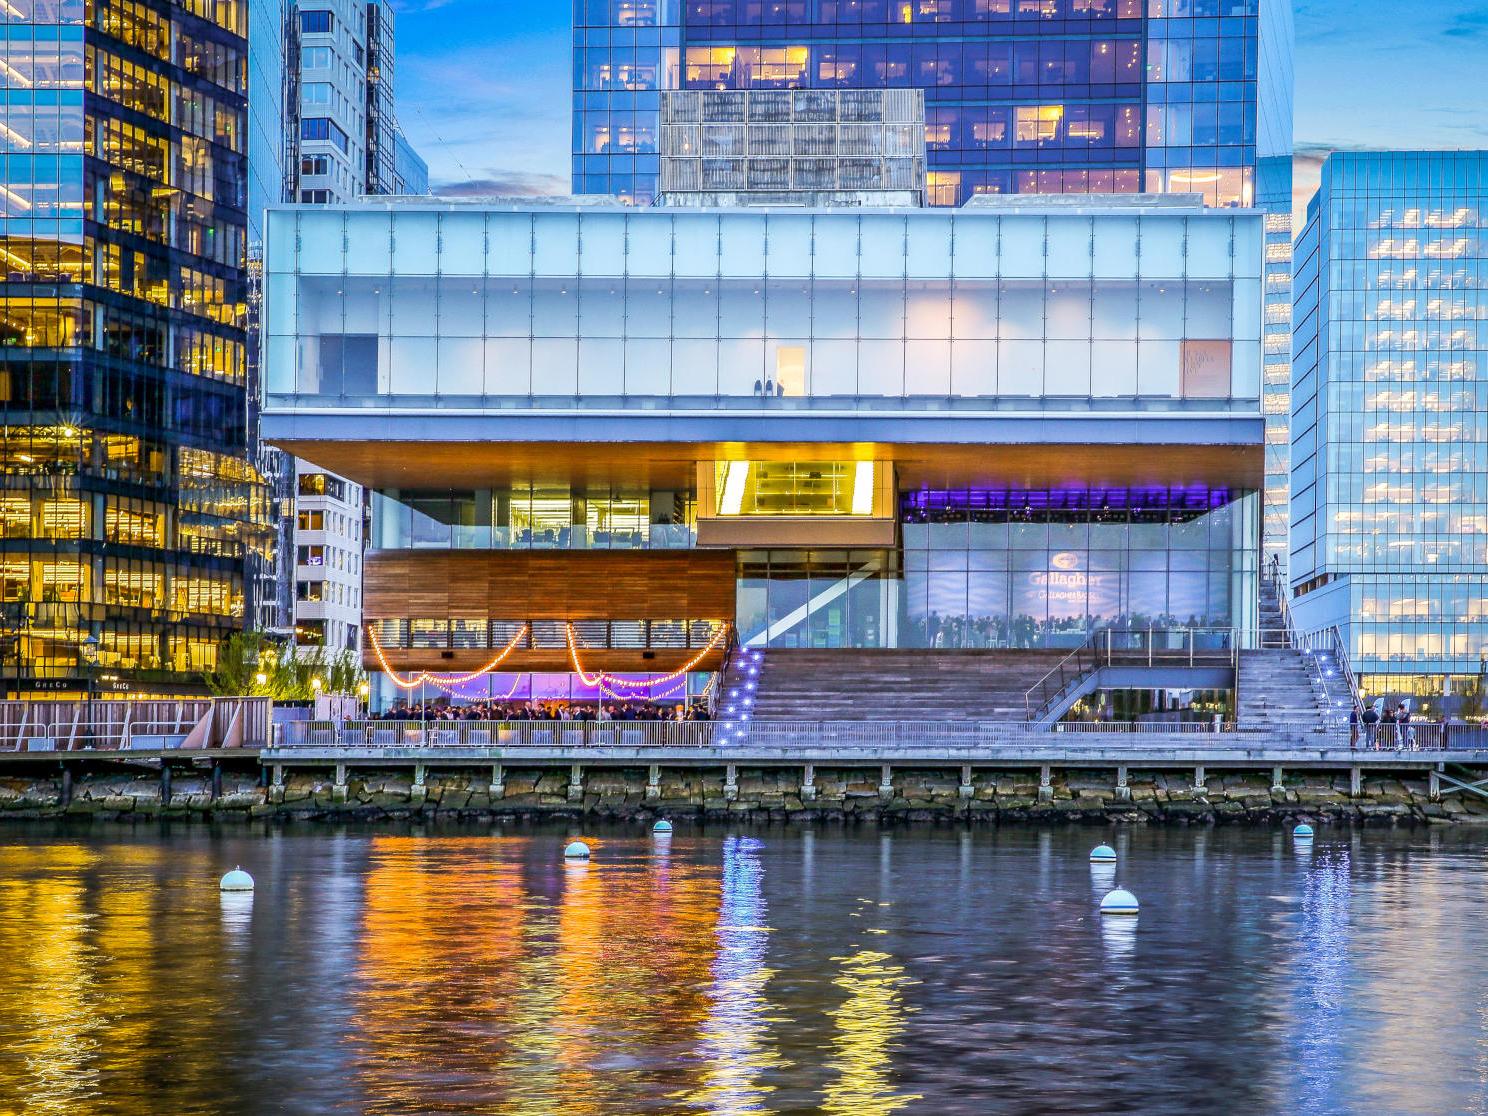 Image of The Institute of Contemporary Art of Boston, MA